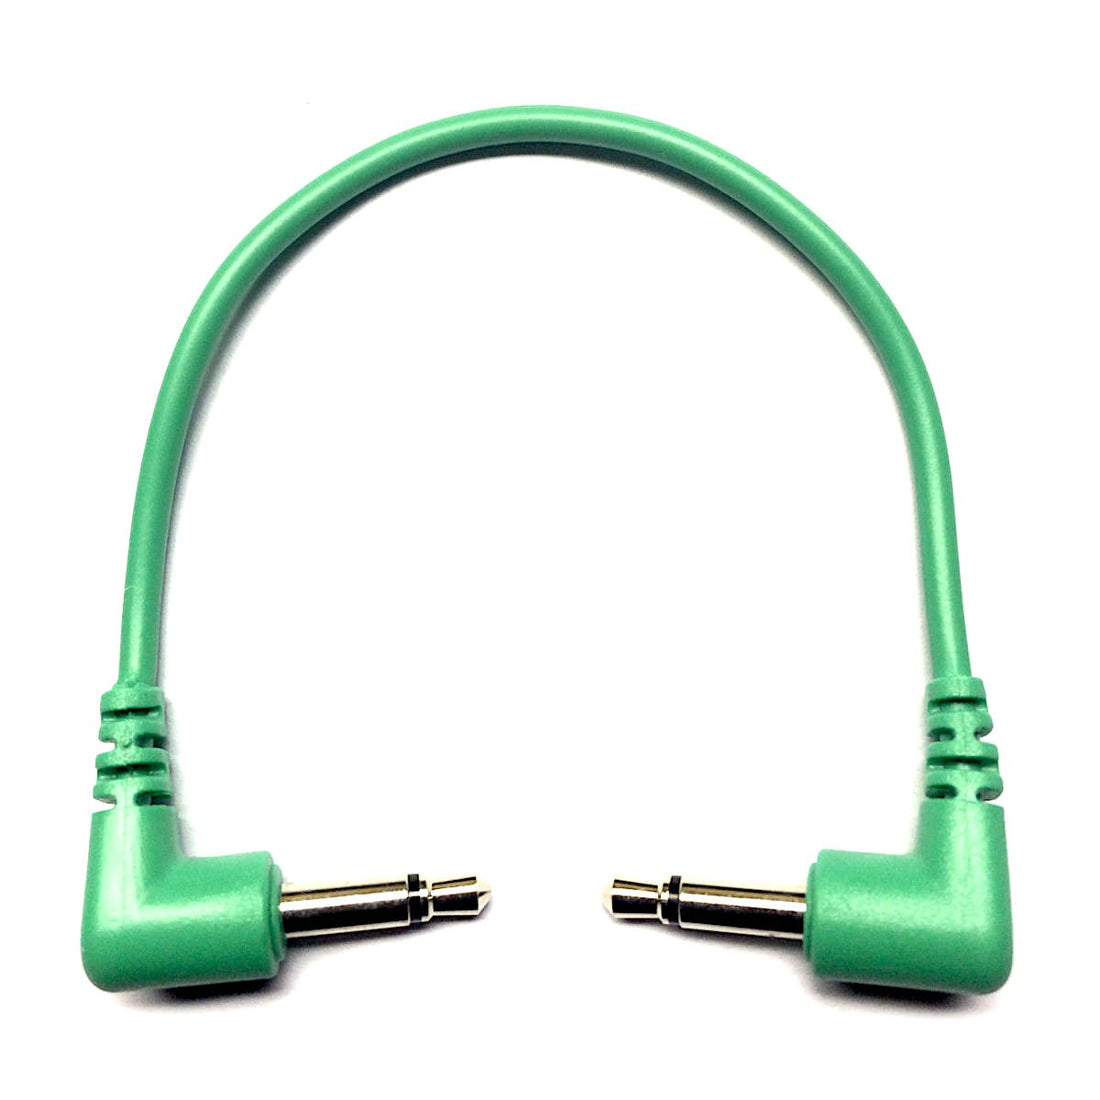 Patch Cable - Emerald 10cm (6 Pack)